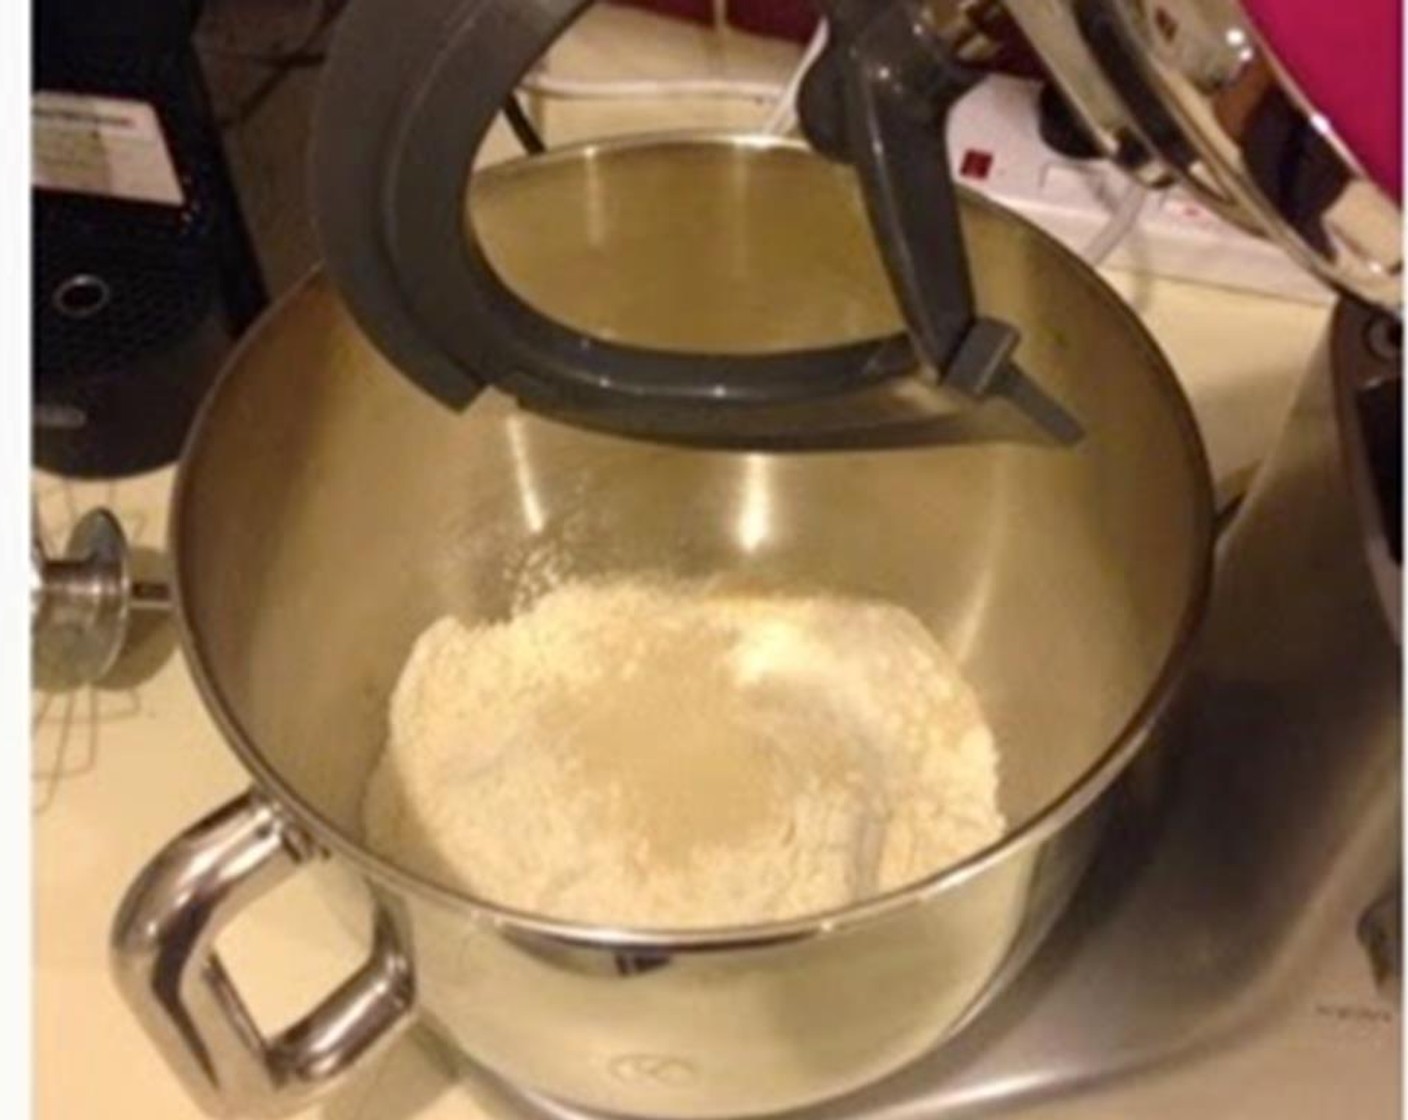 step 1 Combine Bread Flour (2 1/2 cups), Salt (1/2 Tbsp), and Active Dry Yeast (1/2 Tbsp) into a bowl.